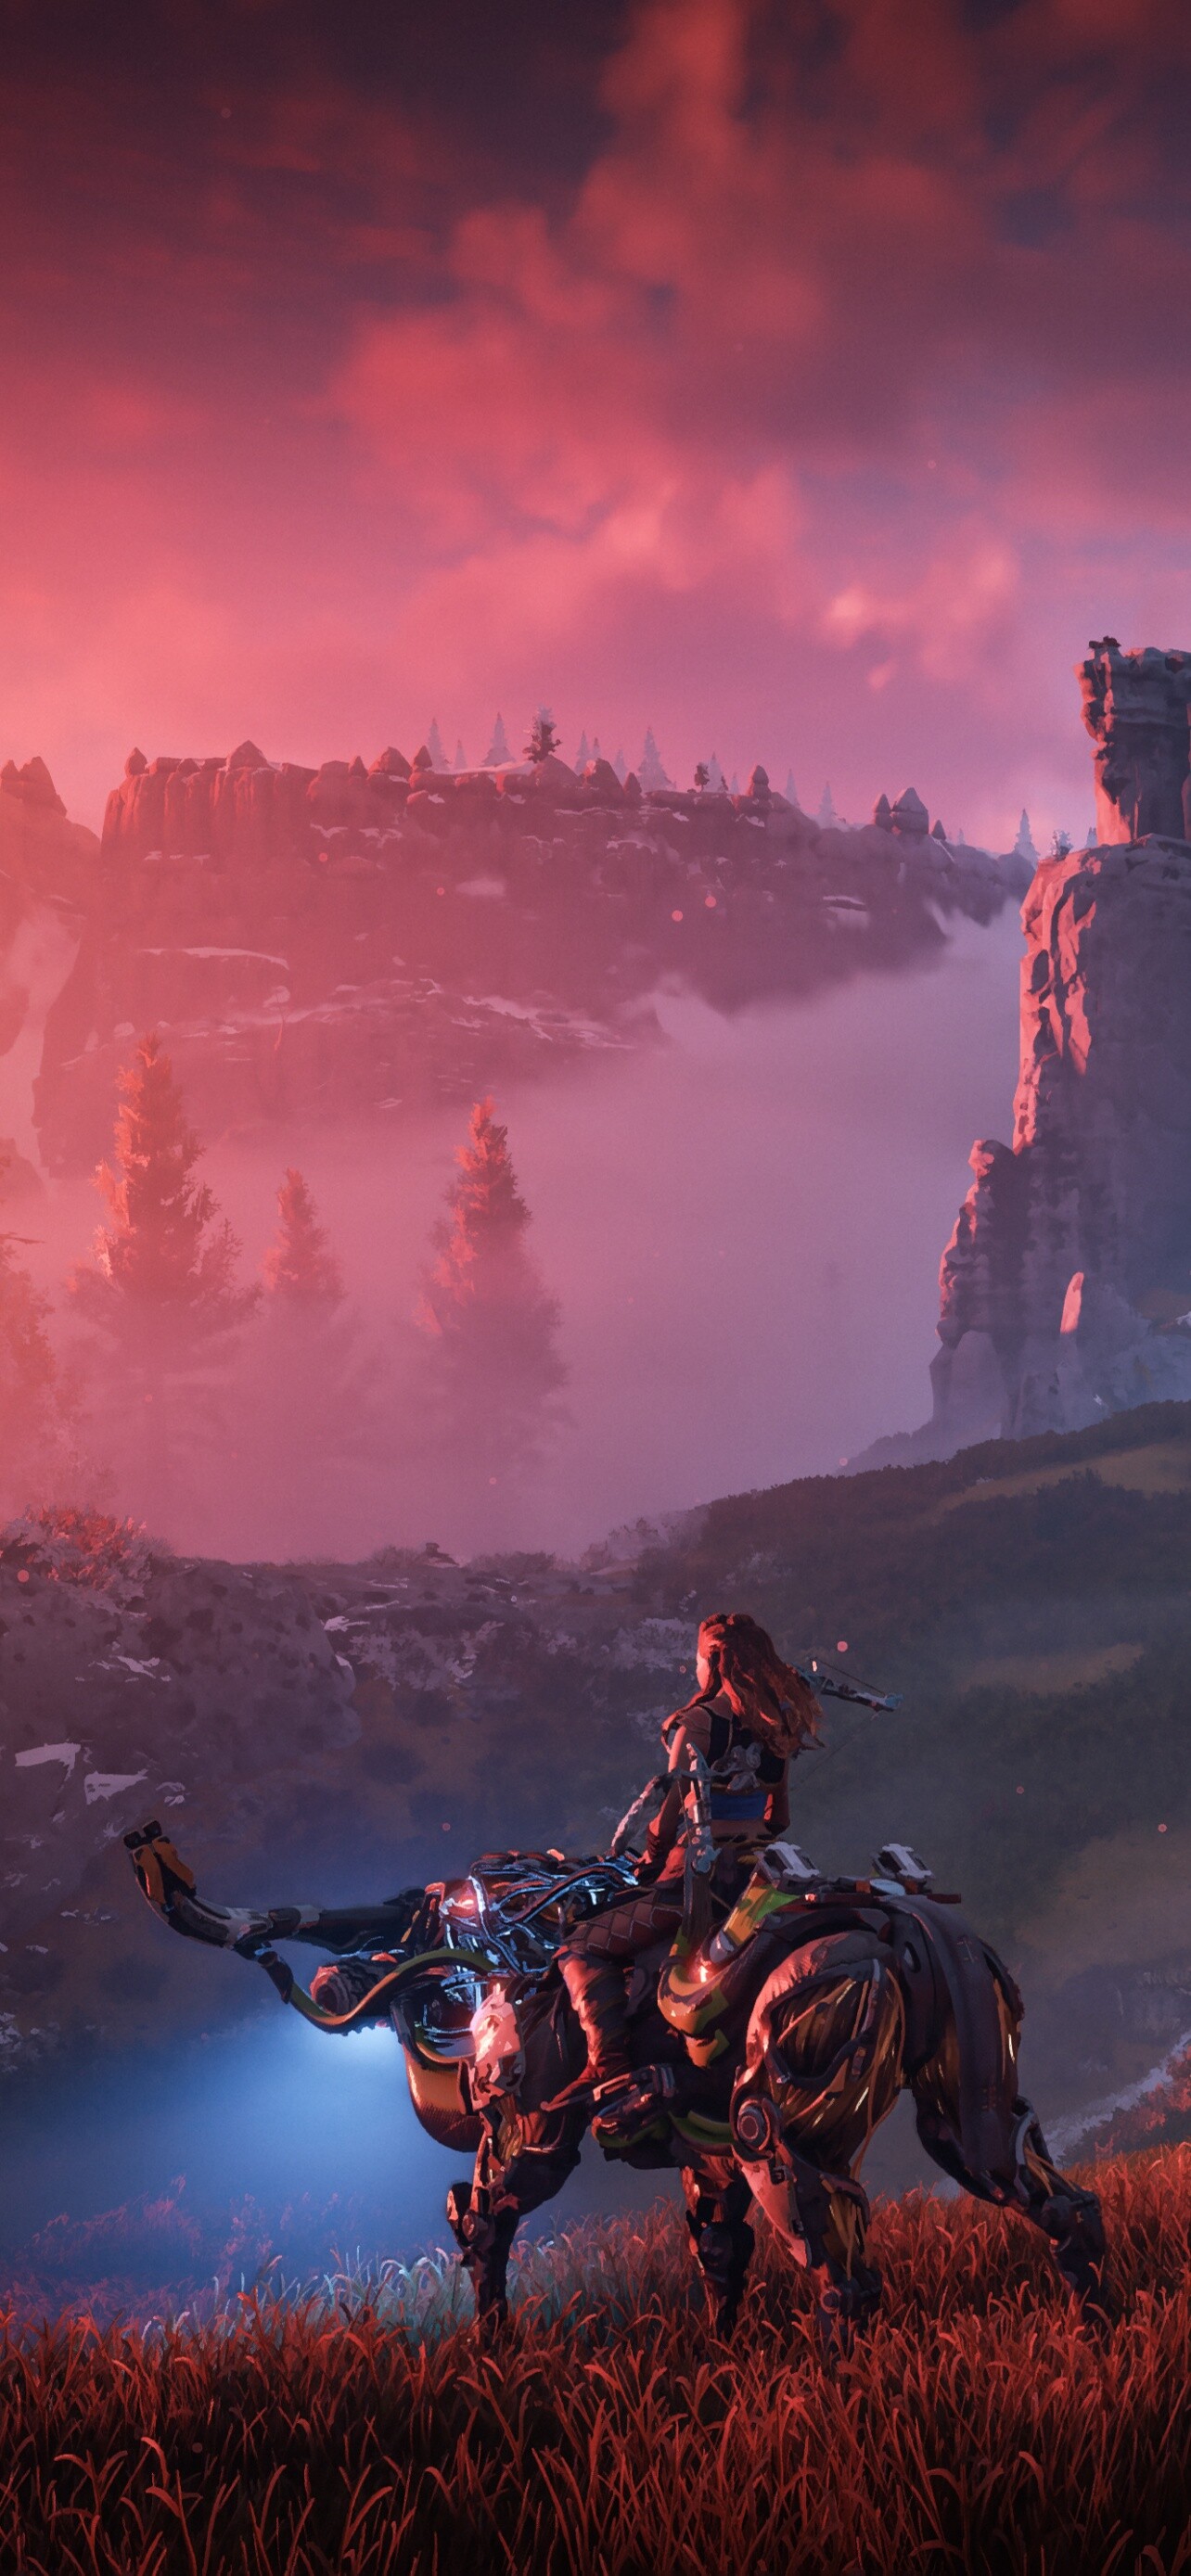 Horizon Zero Dawn: Aloy, Created as a character who could provide many tactical options in battle. 1290x2780 HD Wallpaper.